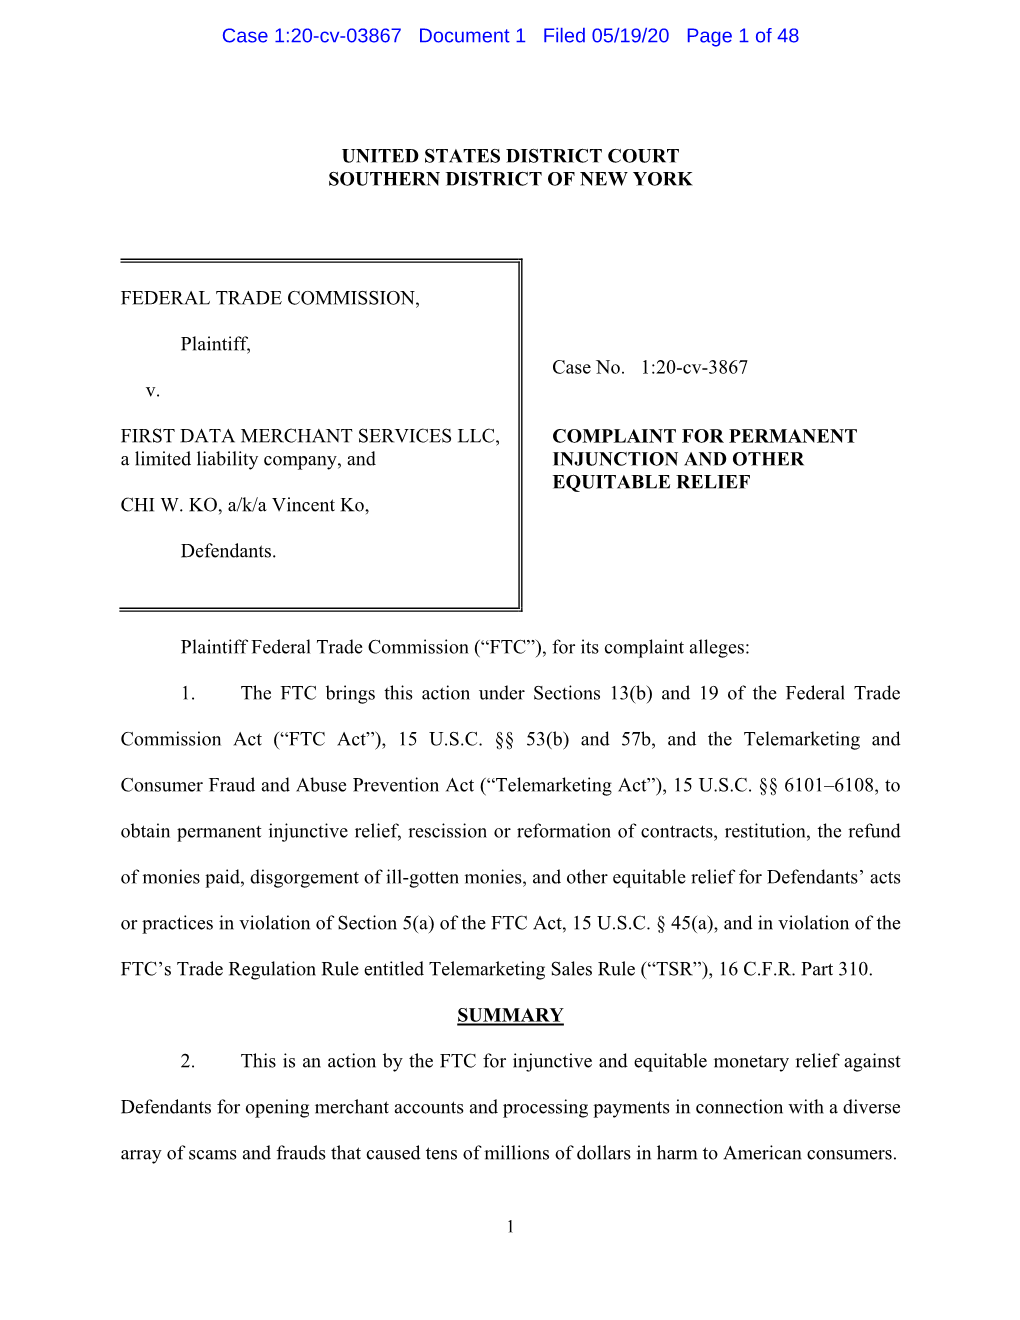 First Data Merchant Services LLC: Complaint for Permanent Injunction